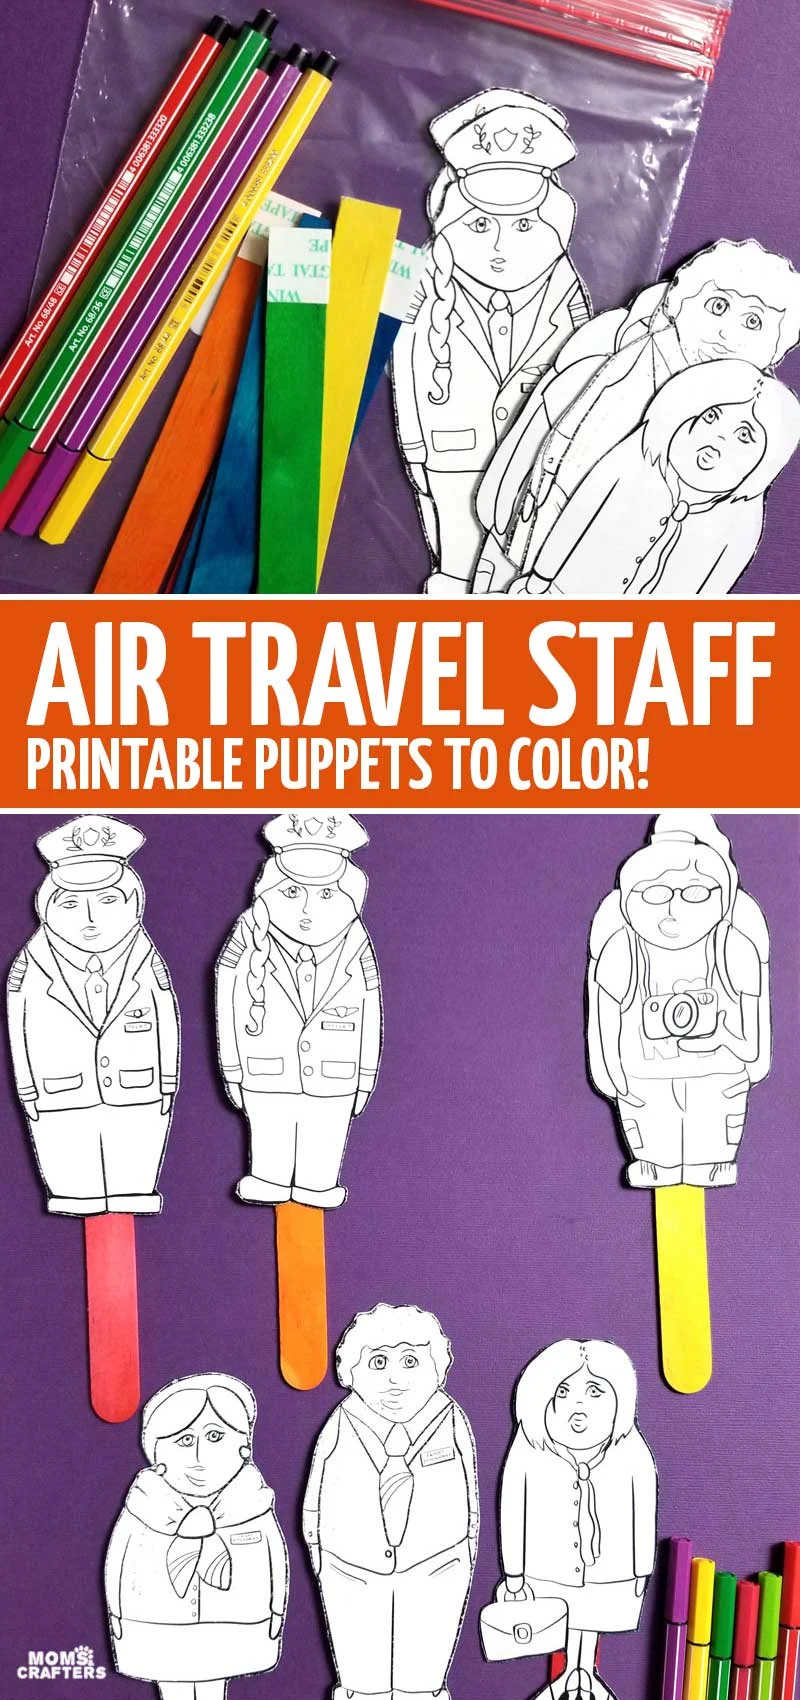 Click for these plane travel puppets - a fun airplane travel activity for toddlers and kids! This fun airplane craft is a fun travel craft for doing on the airplane or in the airport.